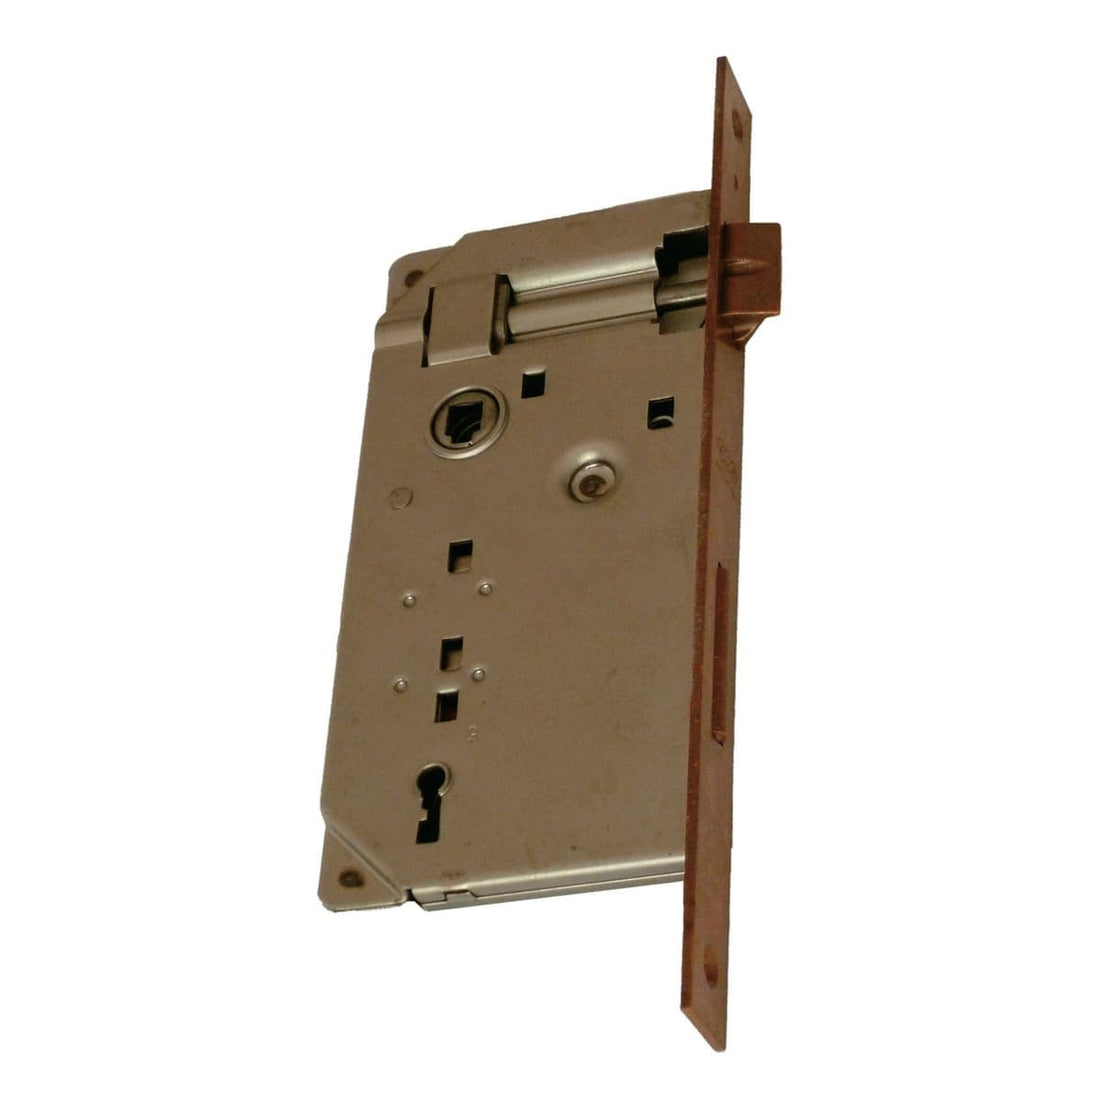 PATENT LOCK F22 CENTRE DISTANCE 90 MM ENTRY 50 MM BRONZE-PLATED STEEL SQUARE EDGE - best price from Maltashopper.com BR410005160